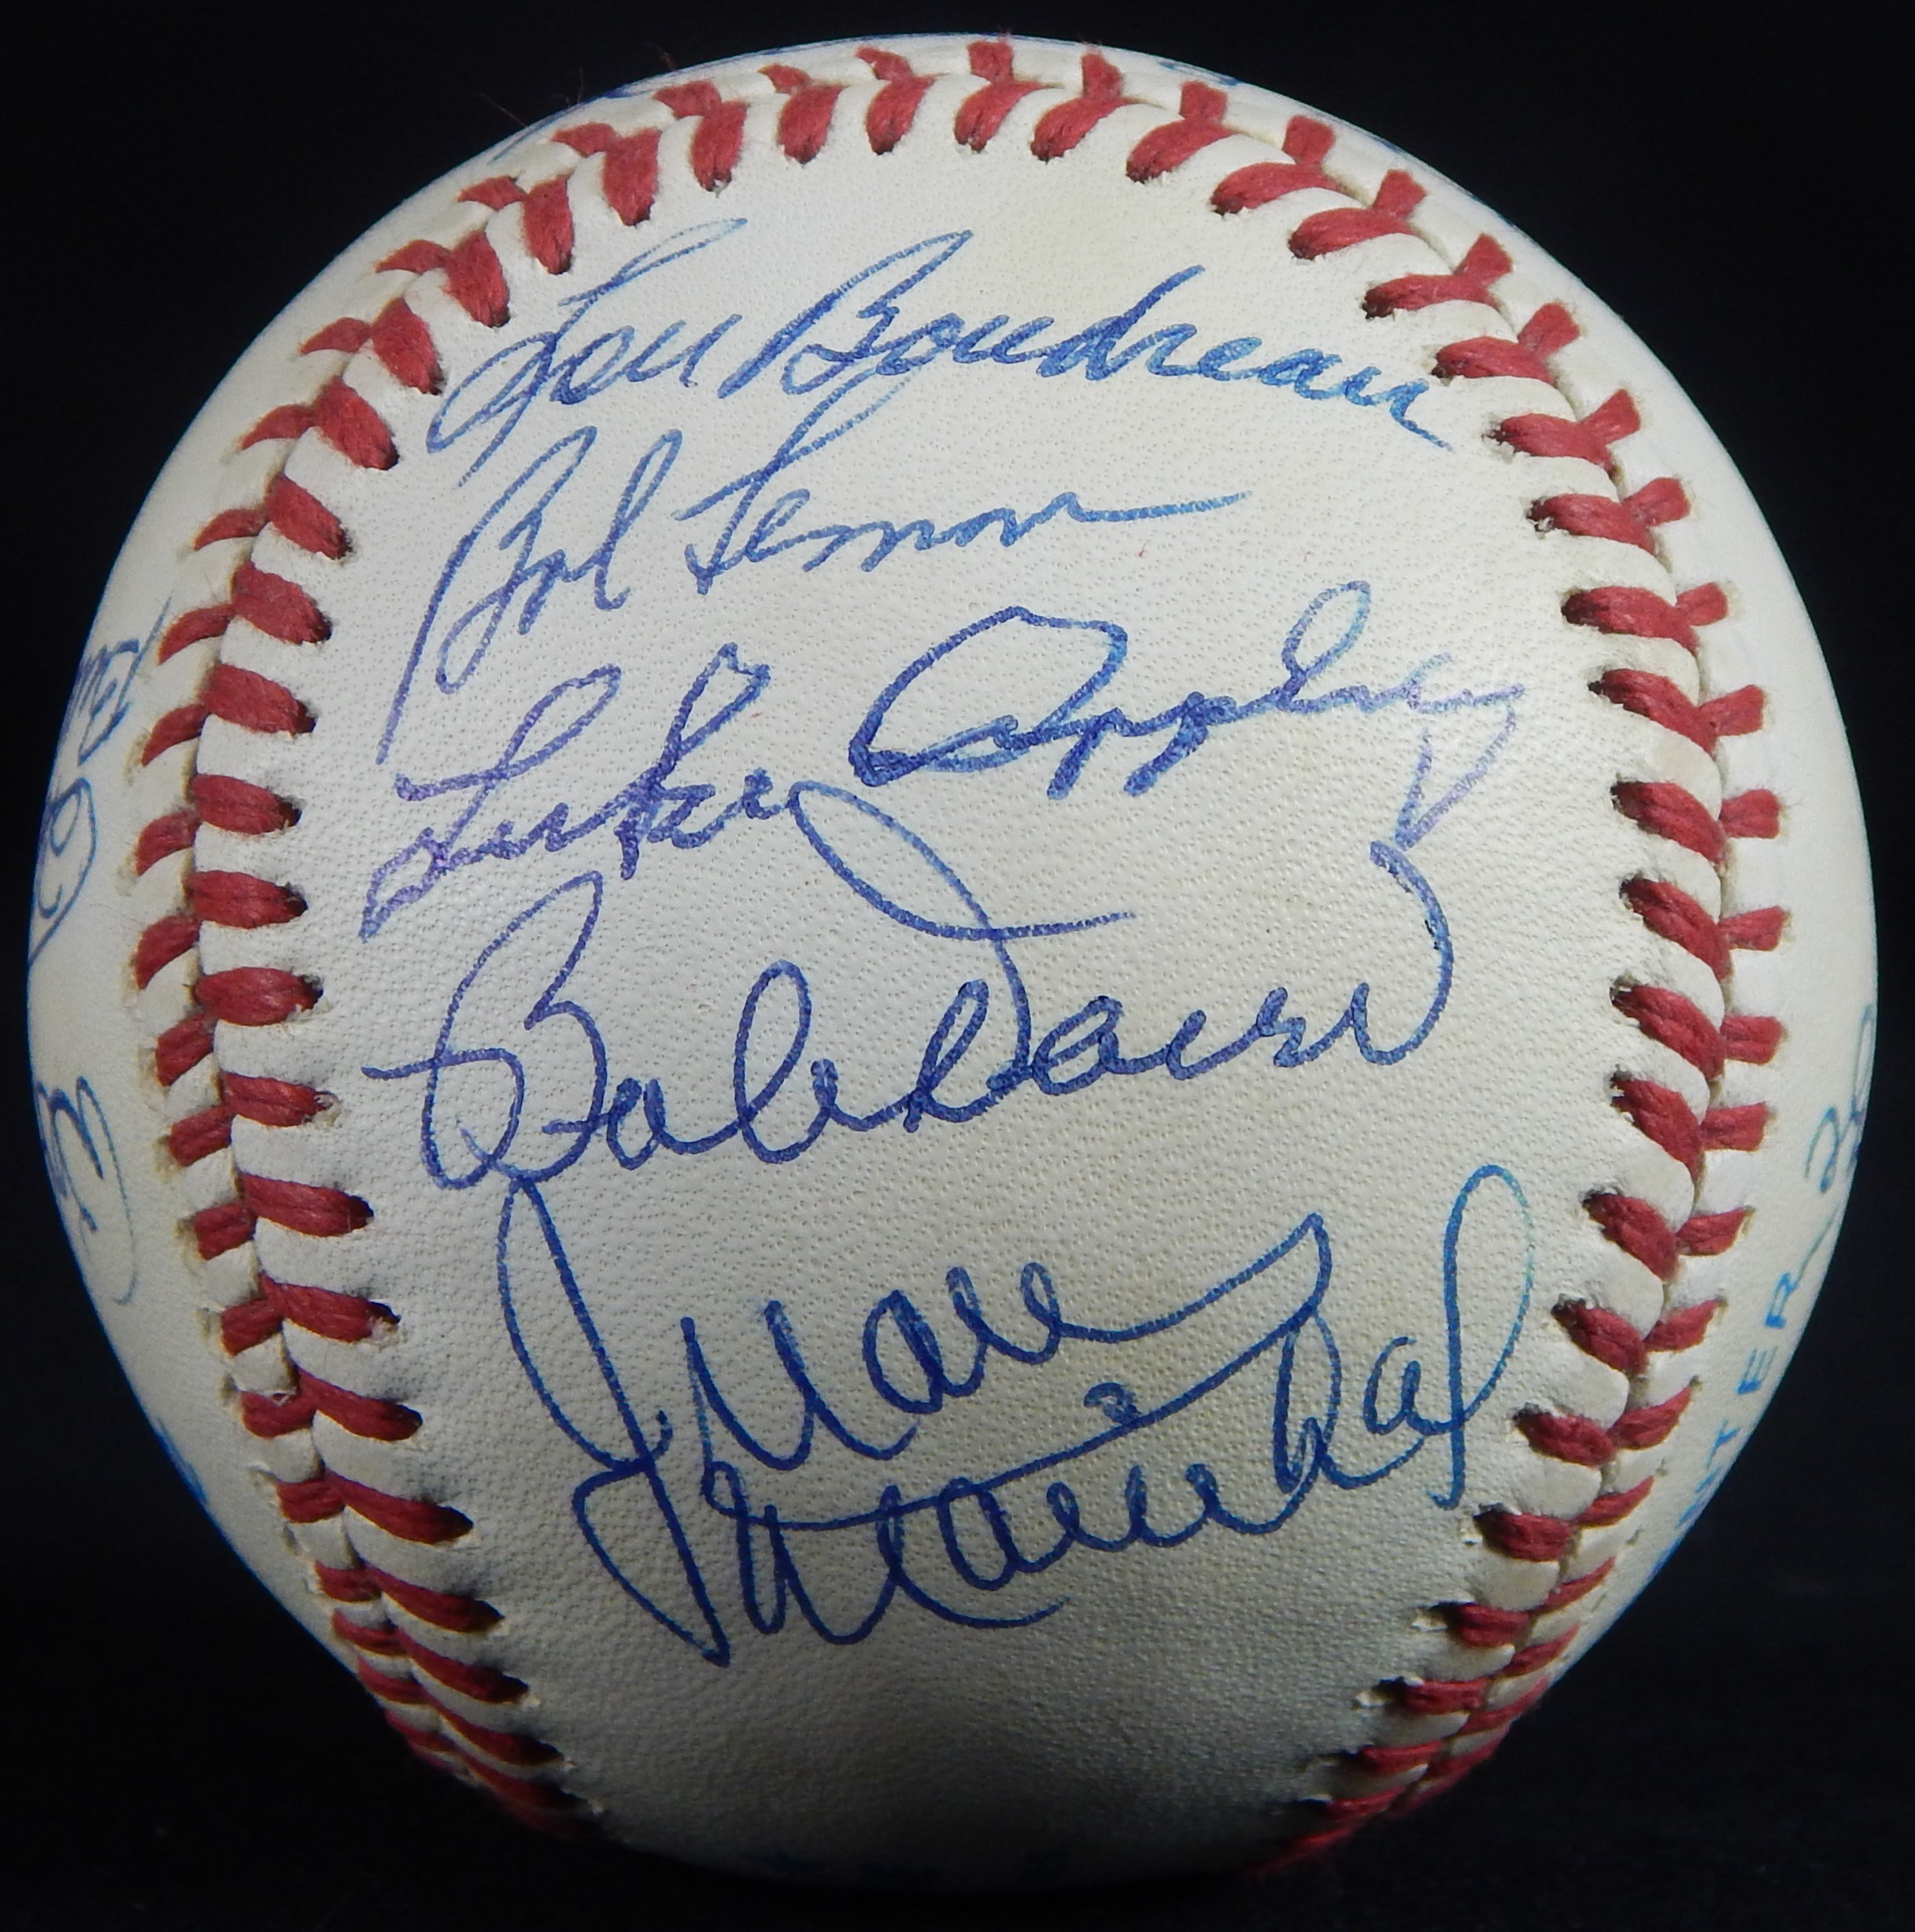 Hall Of Famers Signed baseball (16 signatures)